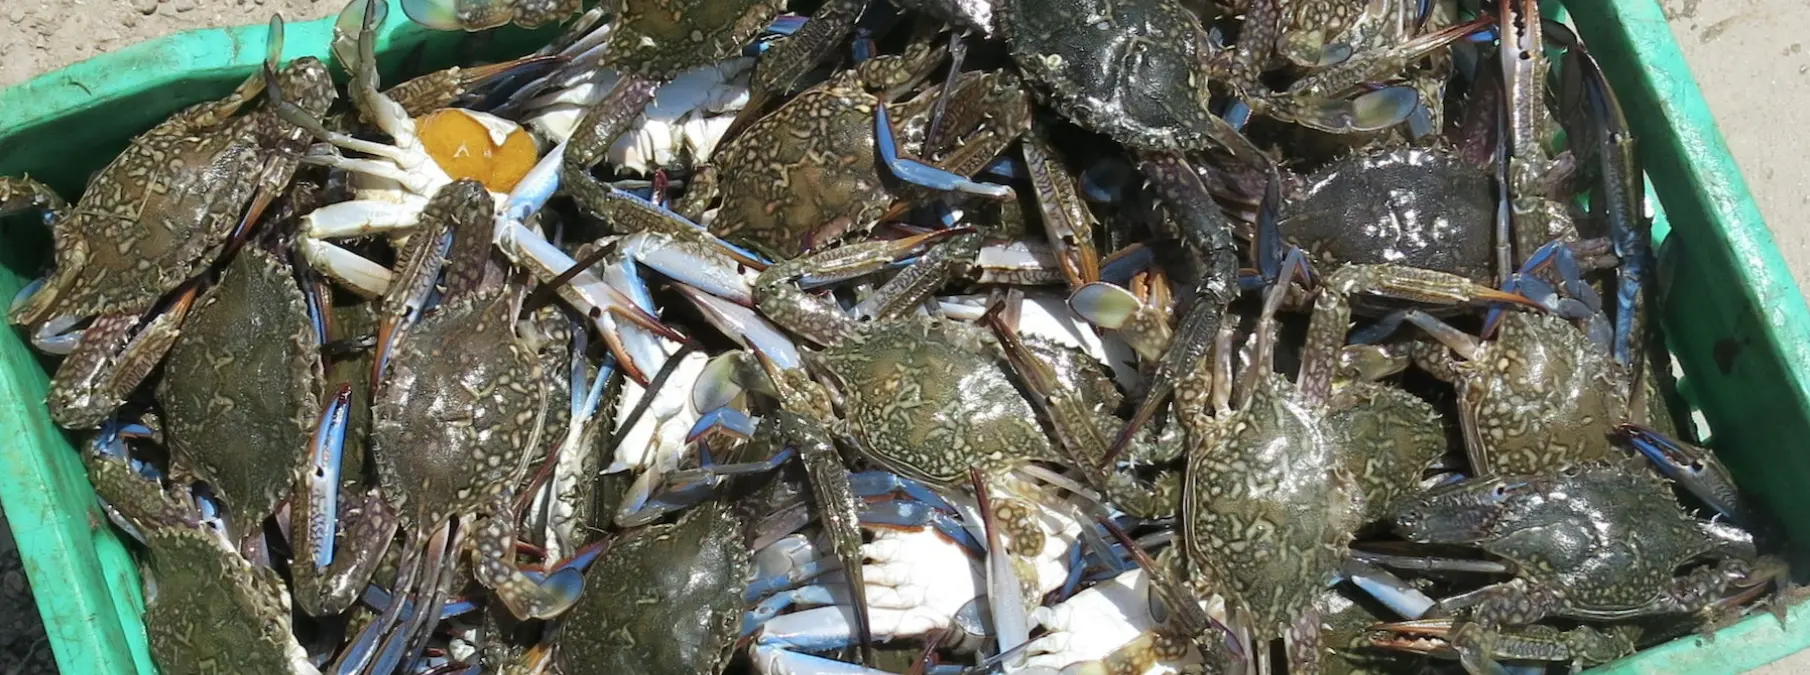 Love 'Em and Loathe 'Em: Mediterranean Grapples With Tasty, Voracious,  Invasive Crabs